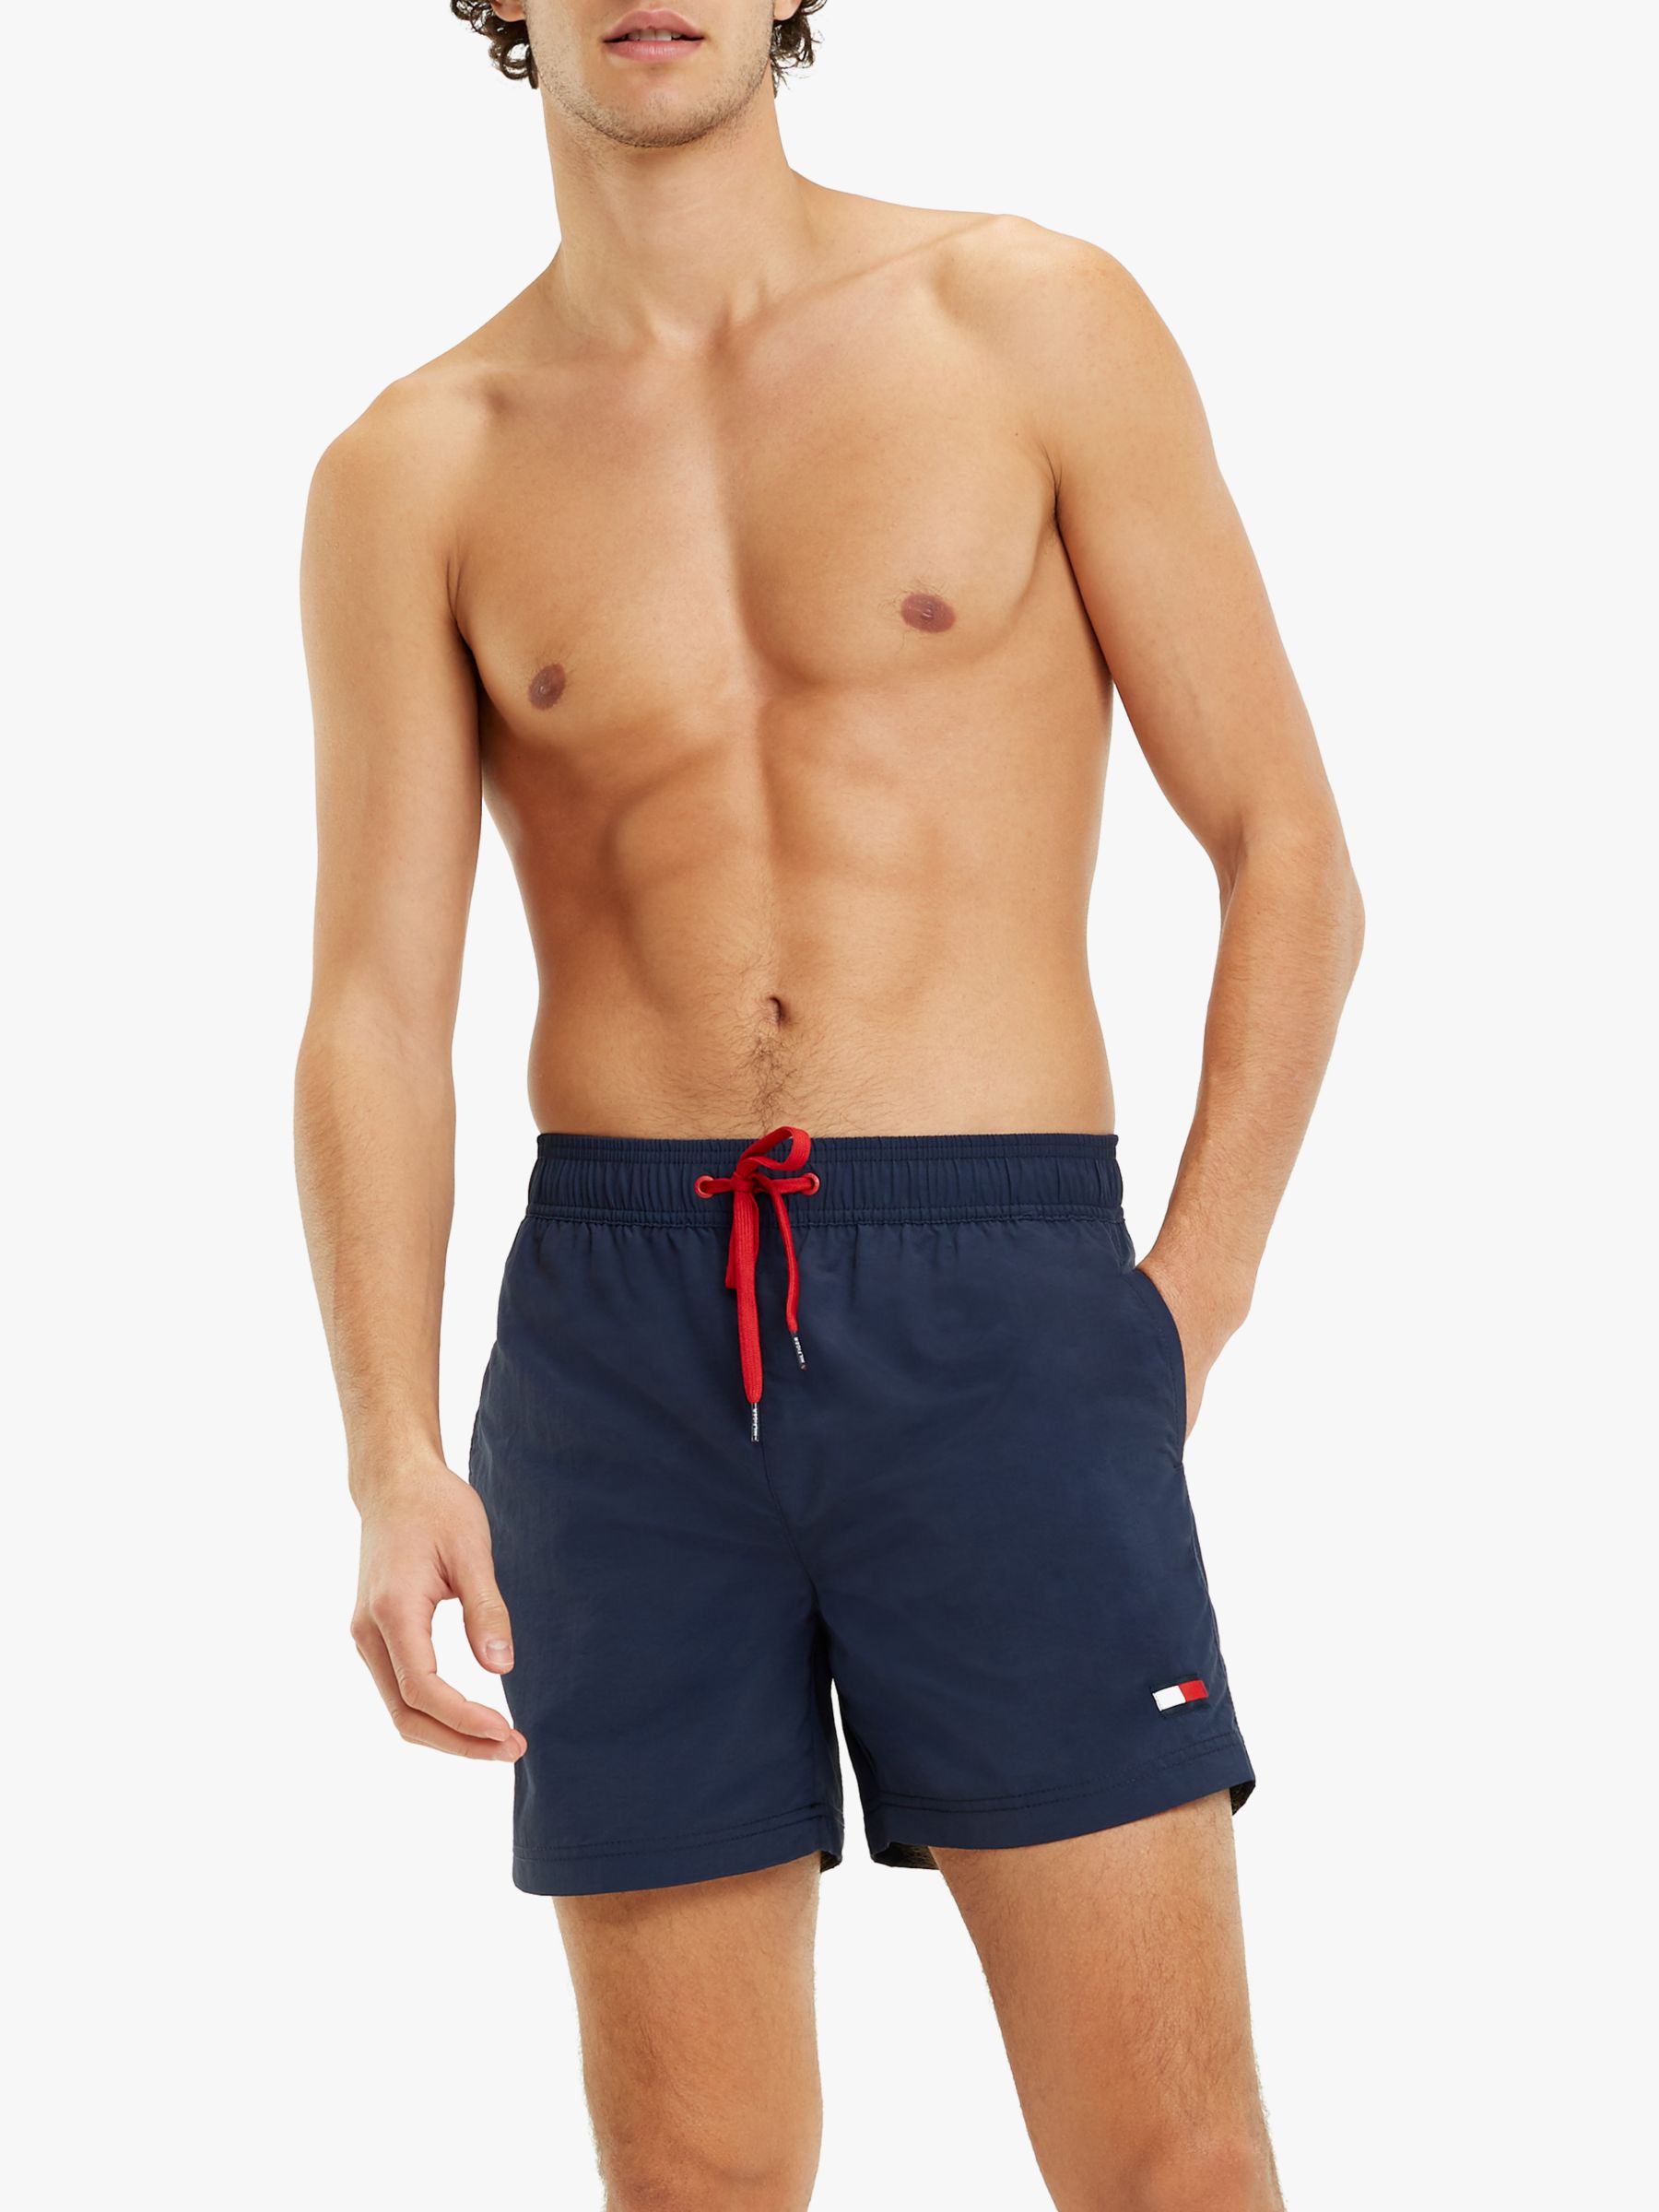 tommy hilfiger mens swimming trunks